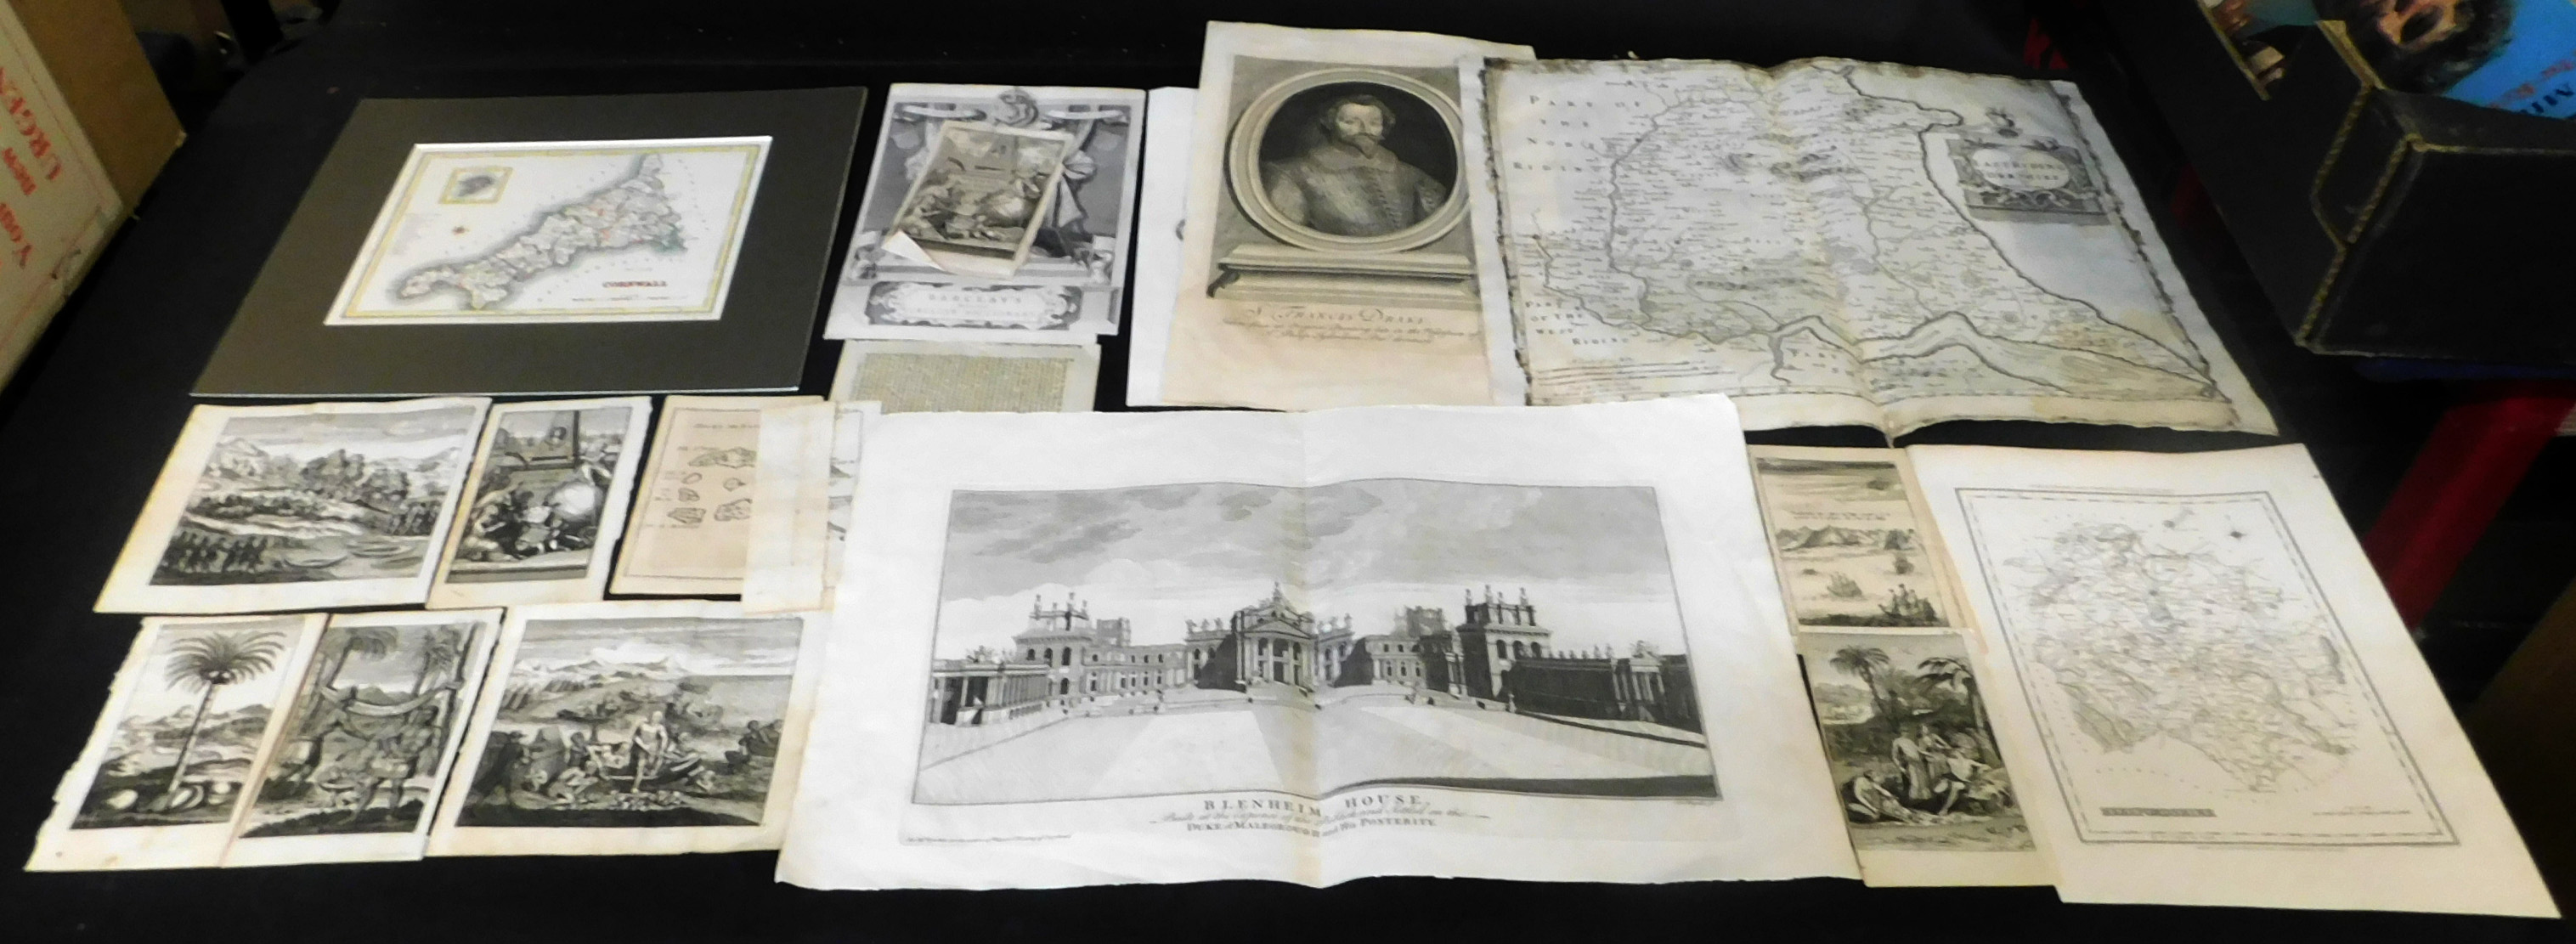 Packet assorted loose 19th century engravings etc